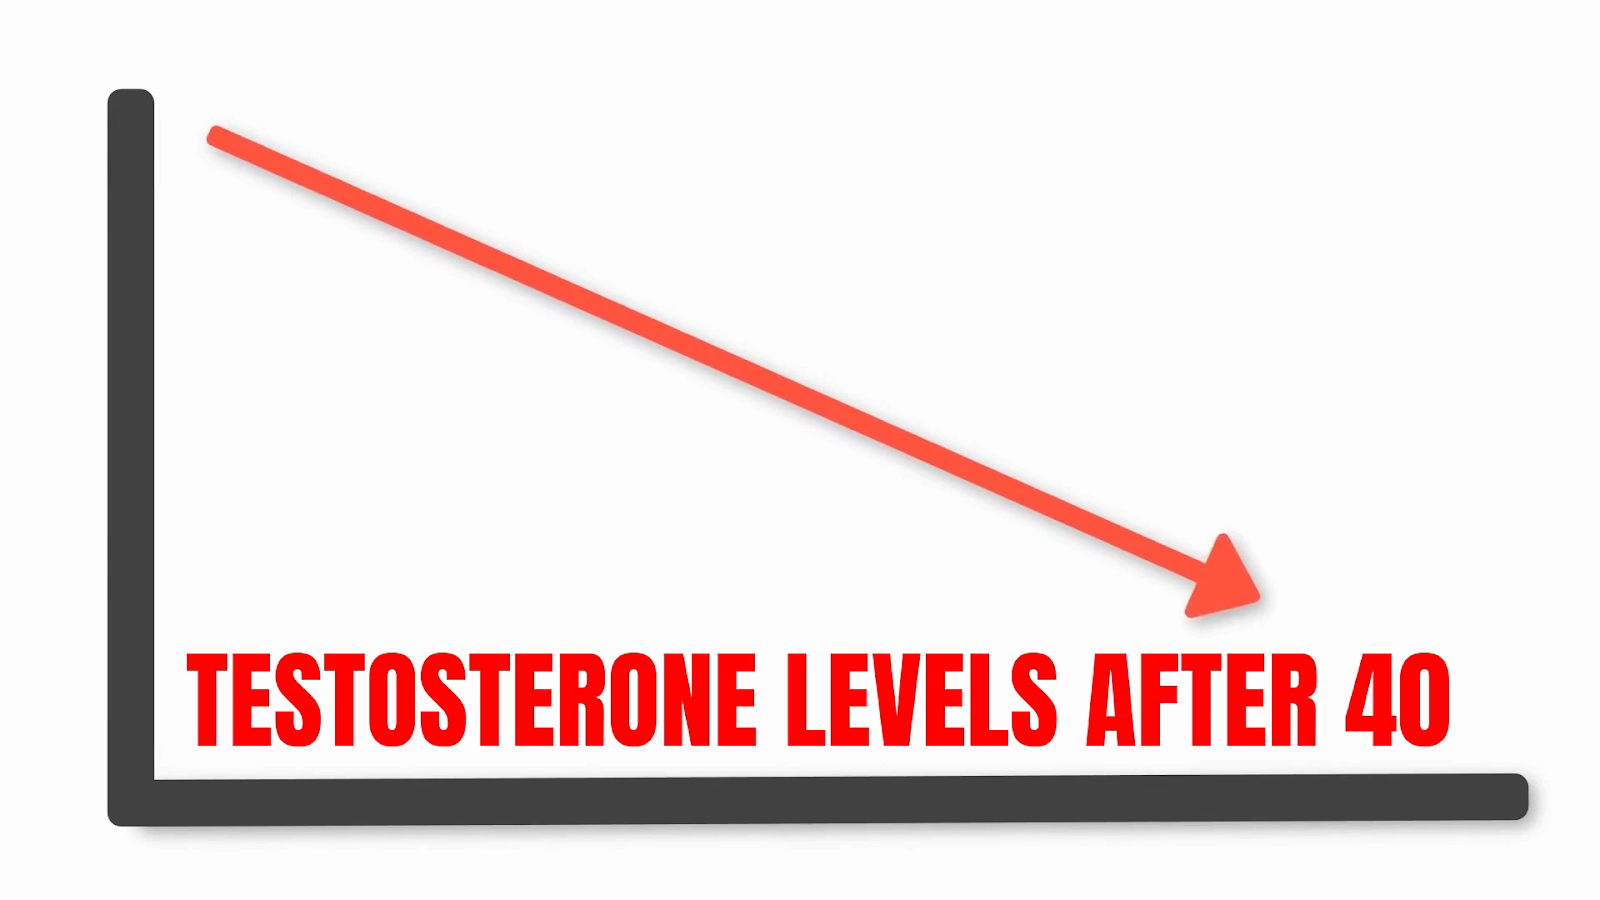 There is a common misconception that testosterone levels plummet after the age of 40